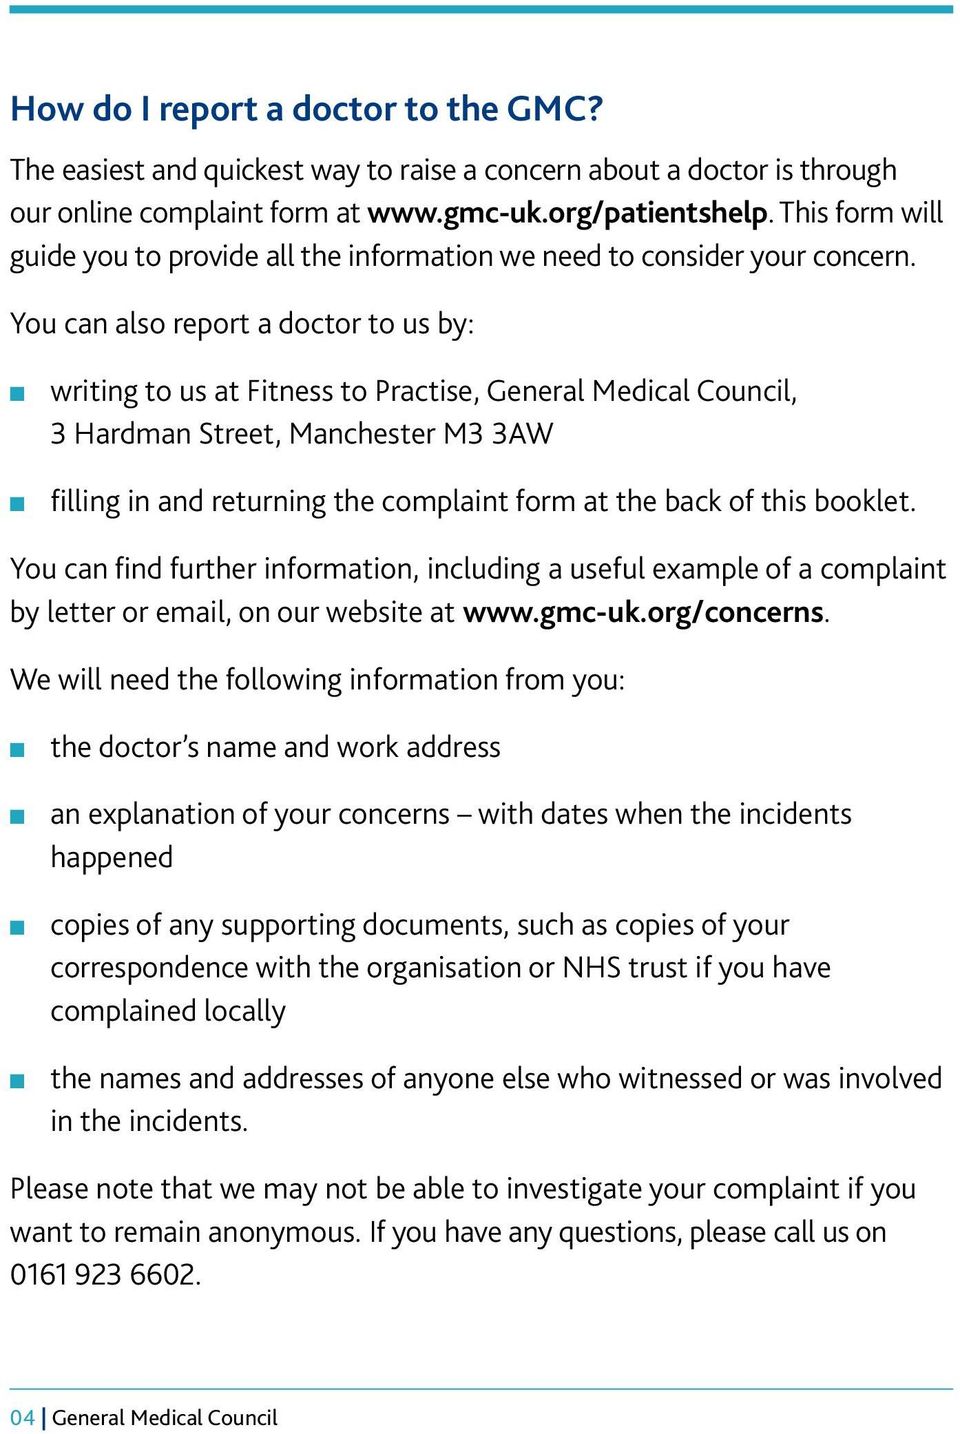 You can also report a doctor to us by: writing to us at Fitness to Practise, General Medical Council, 3 Hardman Street, Manchester M3 3AW filling in and returning the complaint form at the back of